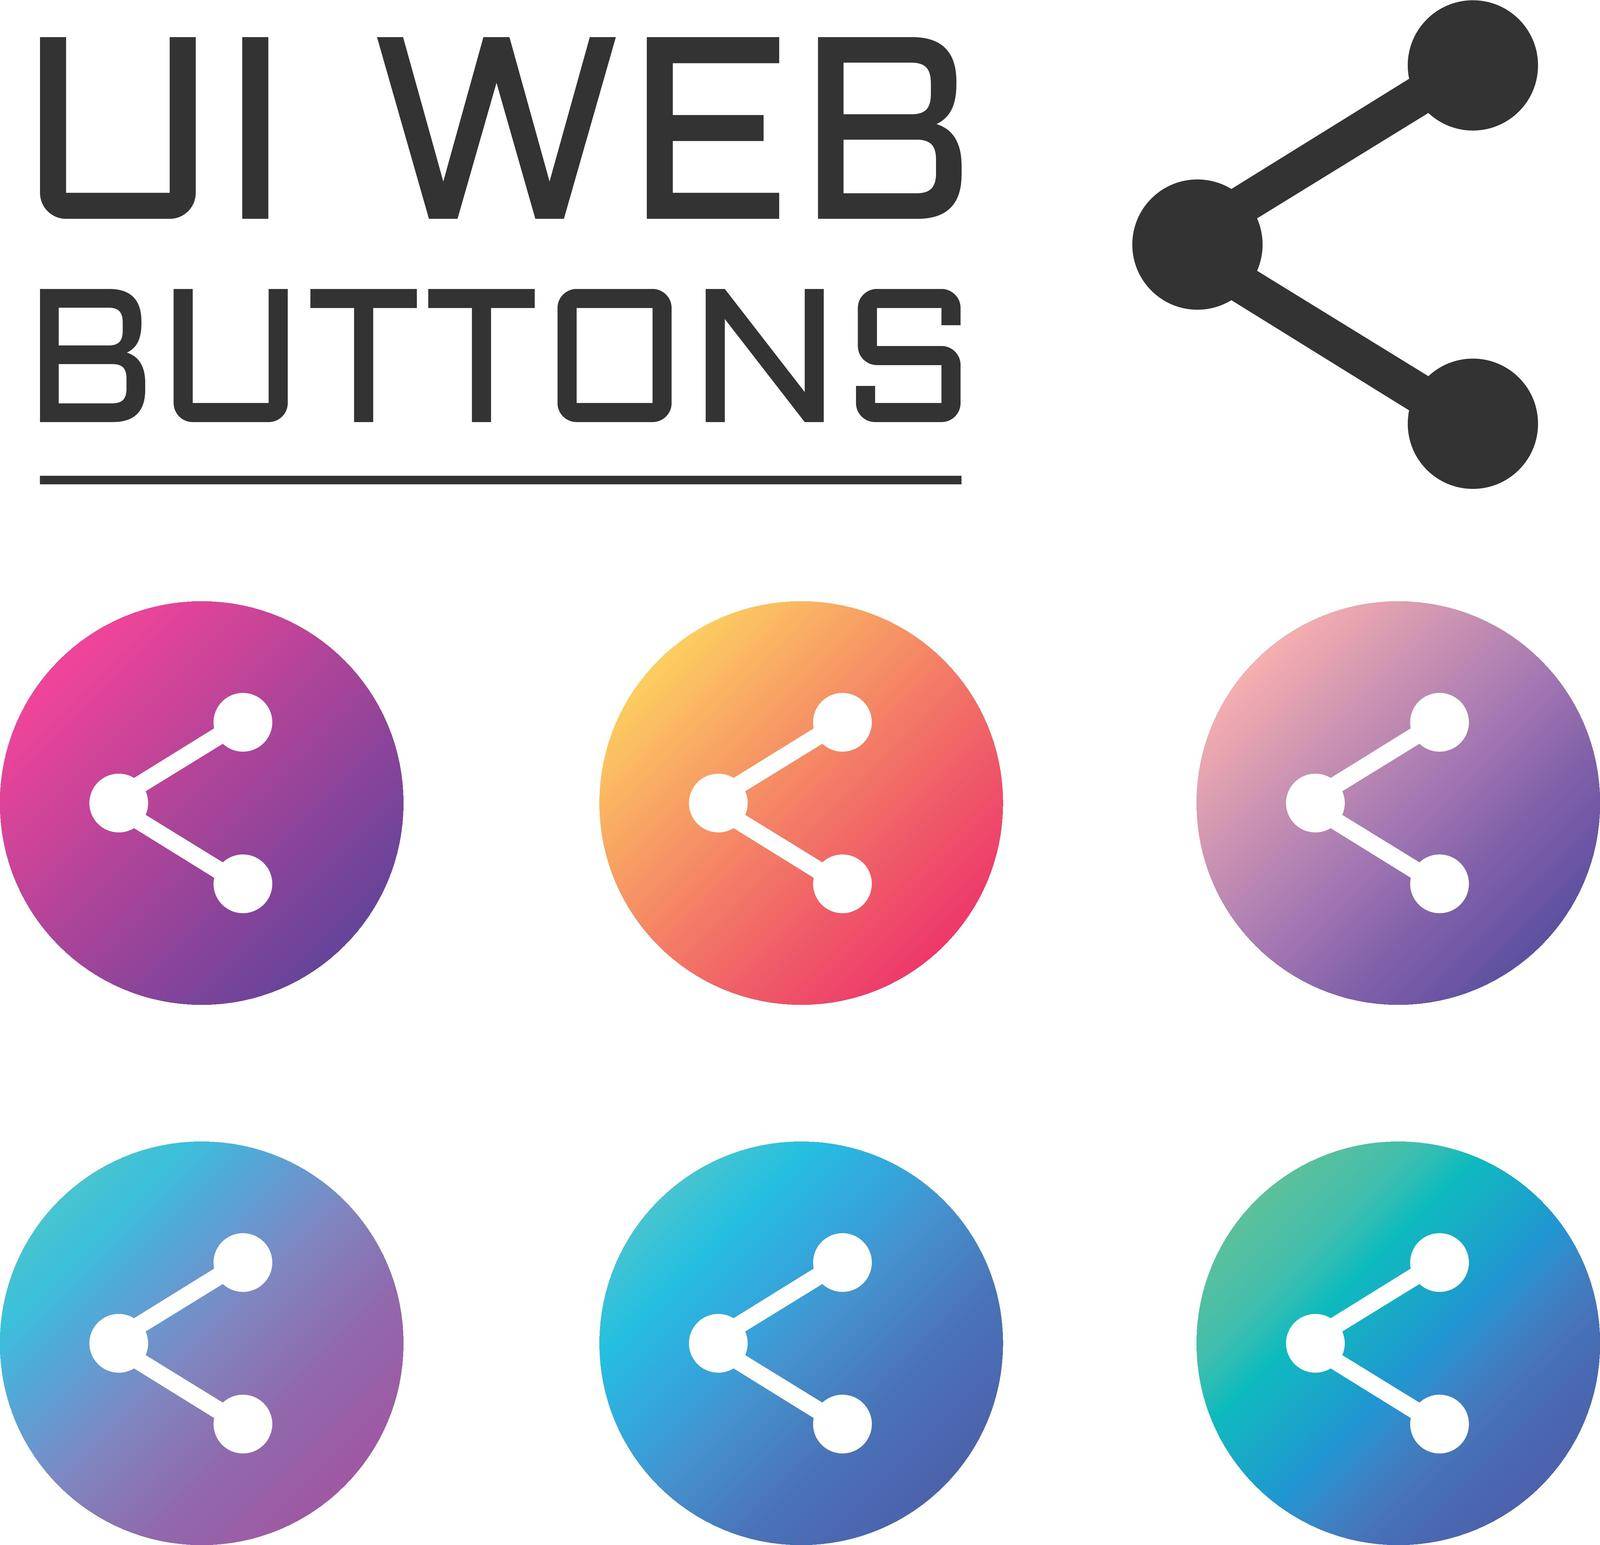 share account ui web button. ui elements. share vector icons on trendy gradients for web, mobile and user interface design